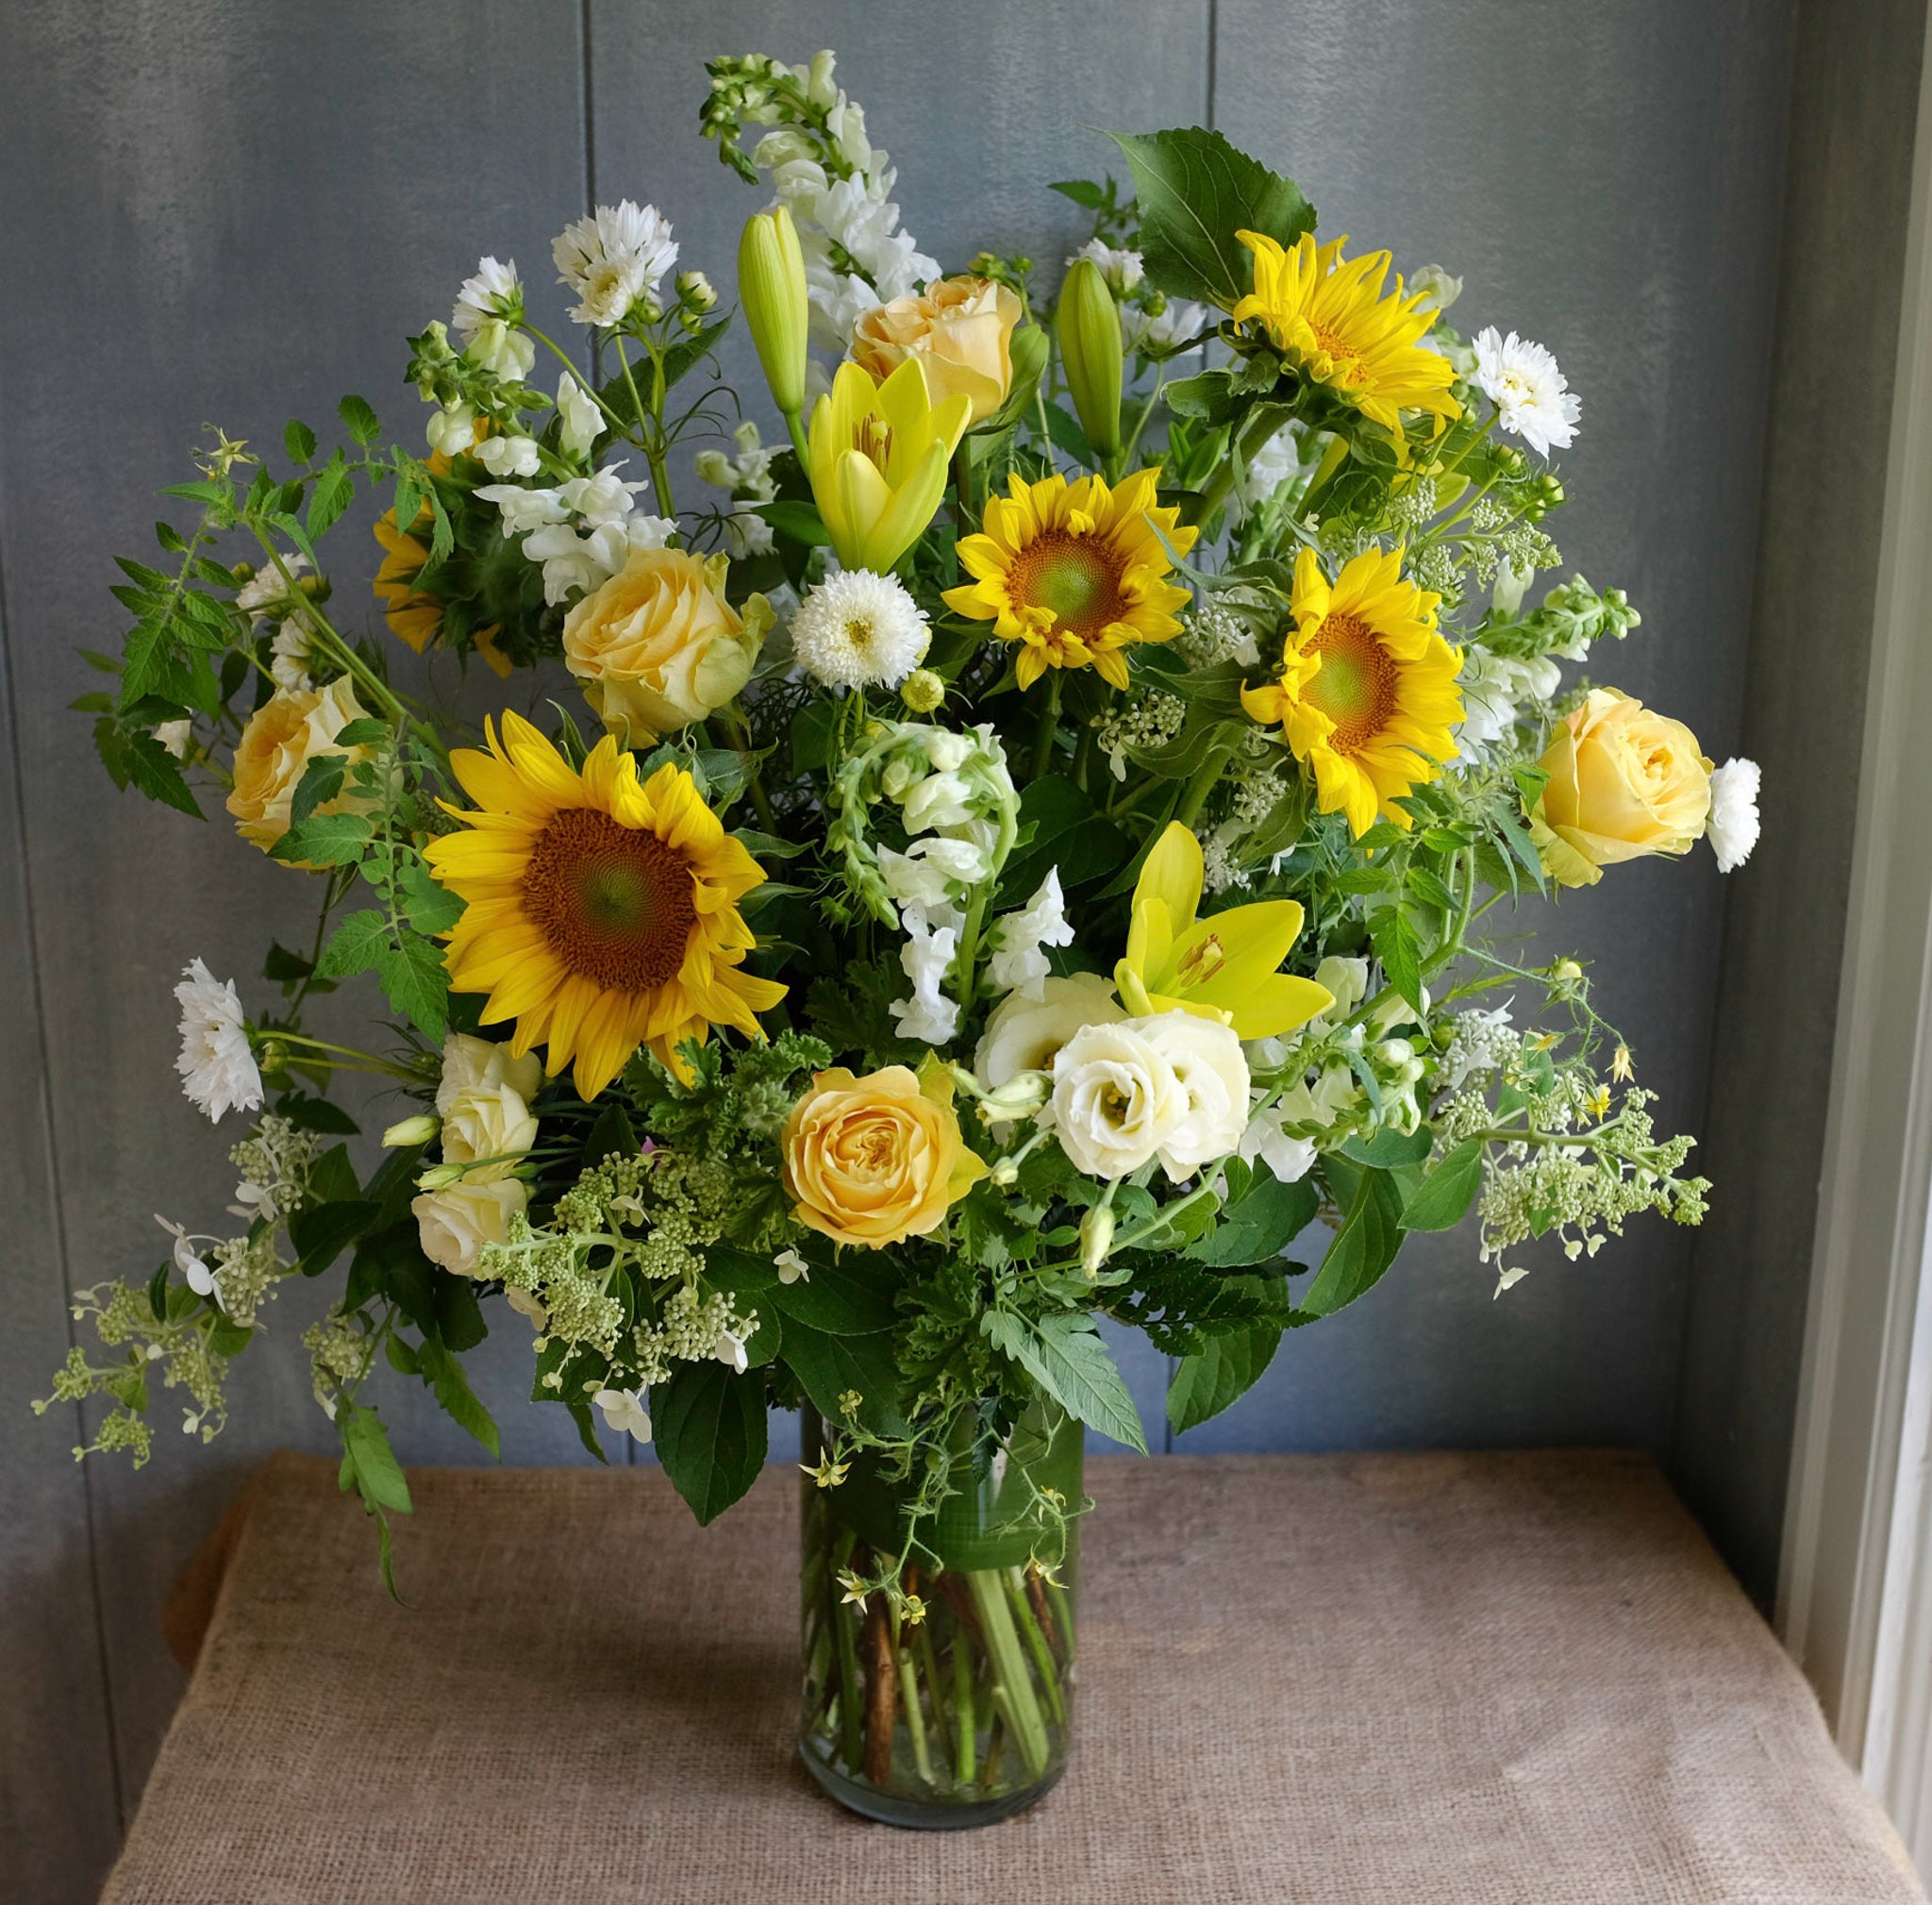 Large bouqet with sunflowers